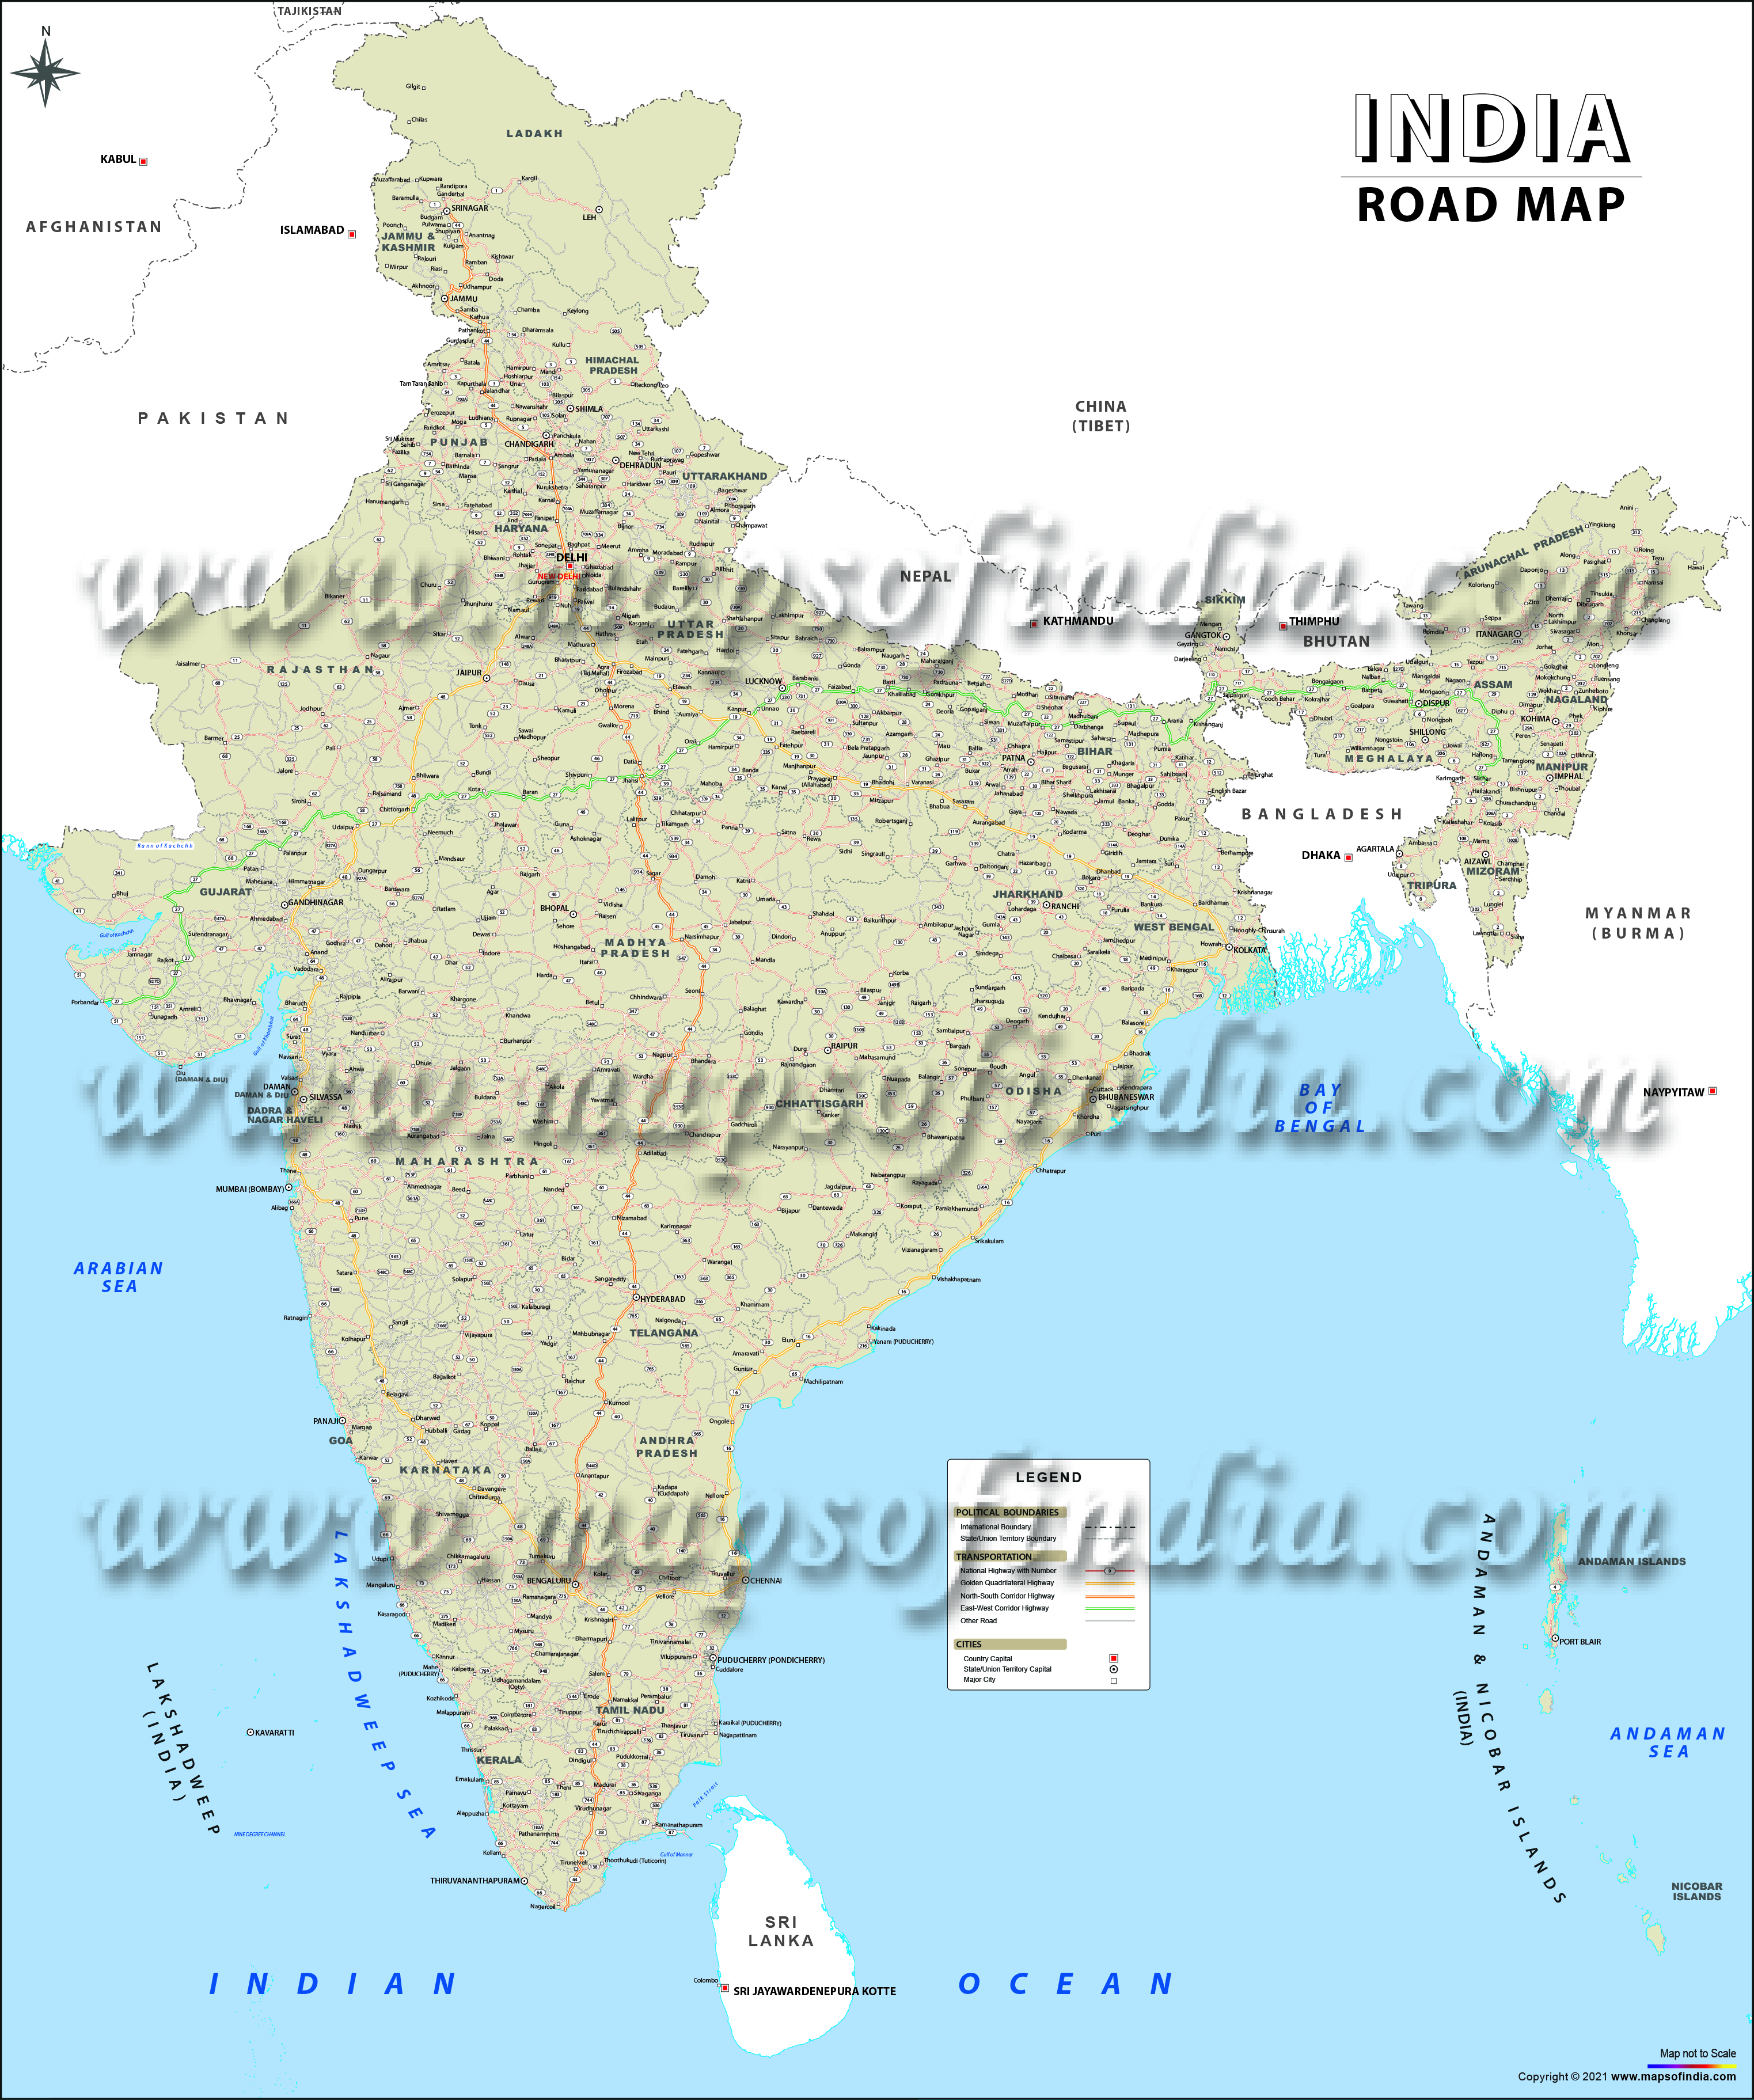 Maps Of India Distance Calculator India Road Maps, Indian Road Network, List of Expressways India